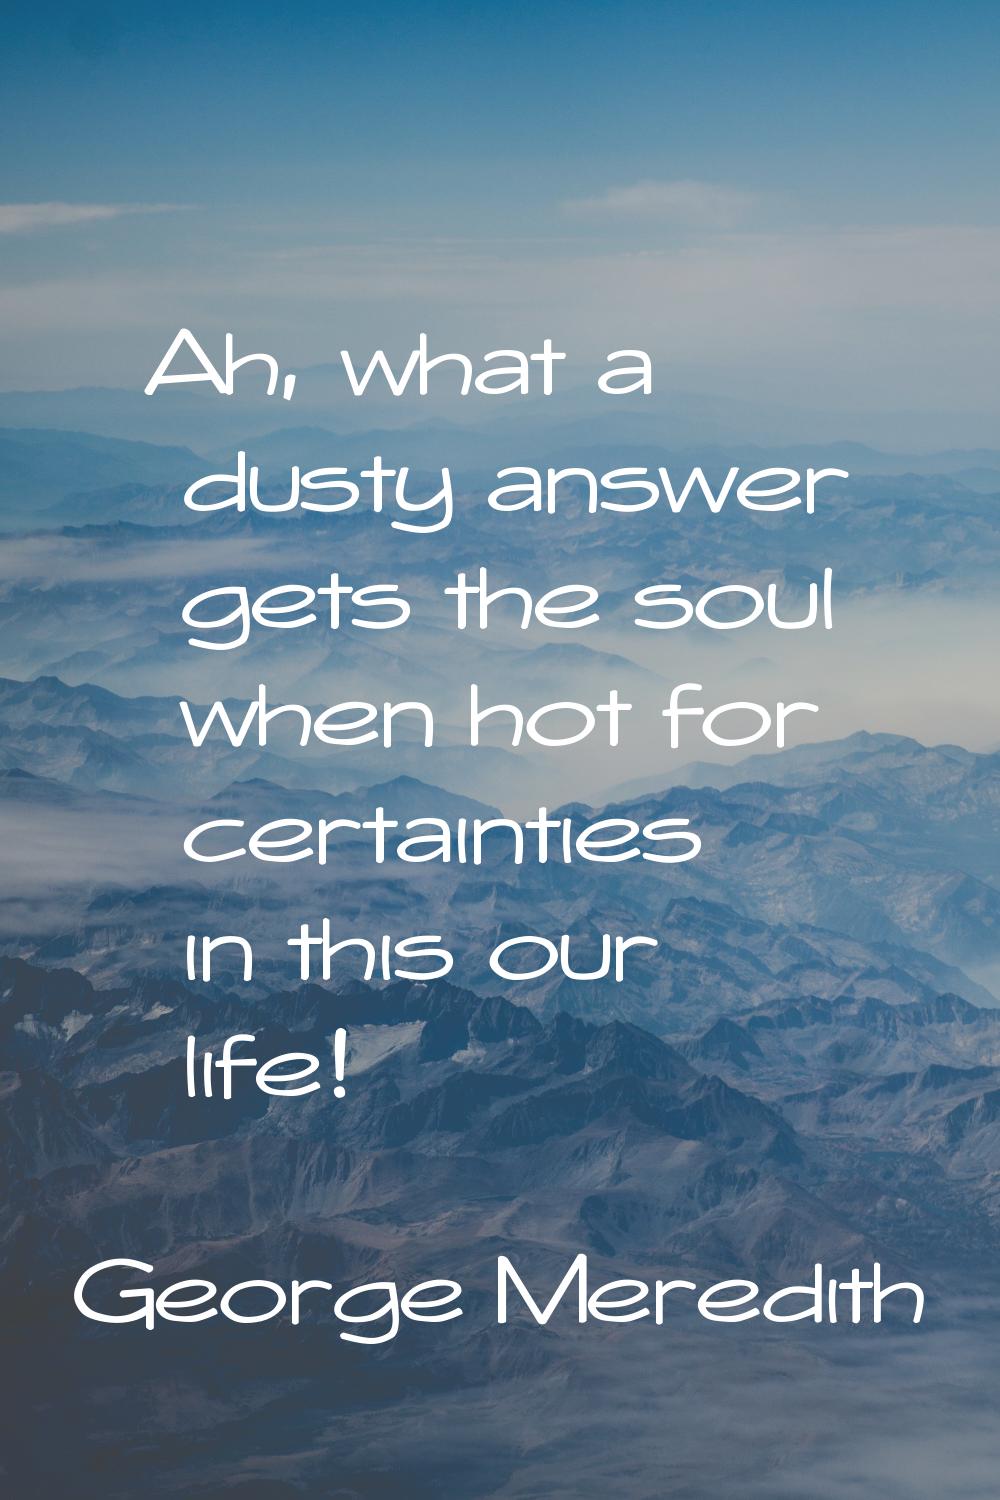 Ah, what a dusty answer gets the soul when hot for certainties in this our life!